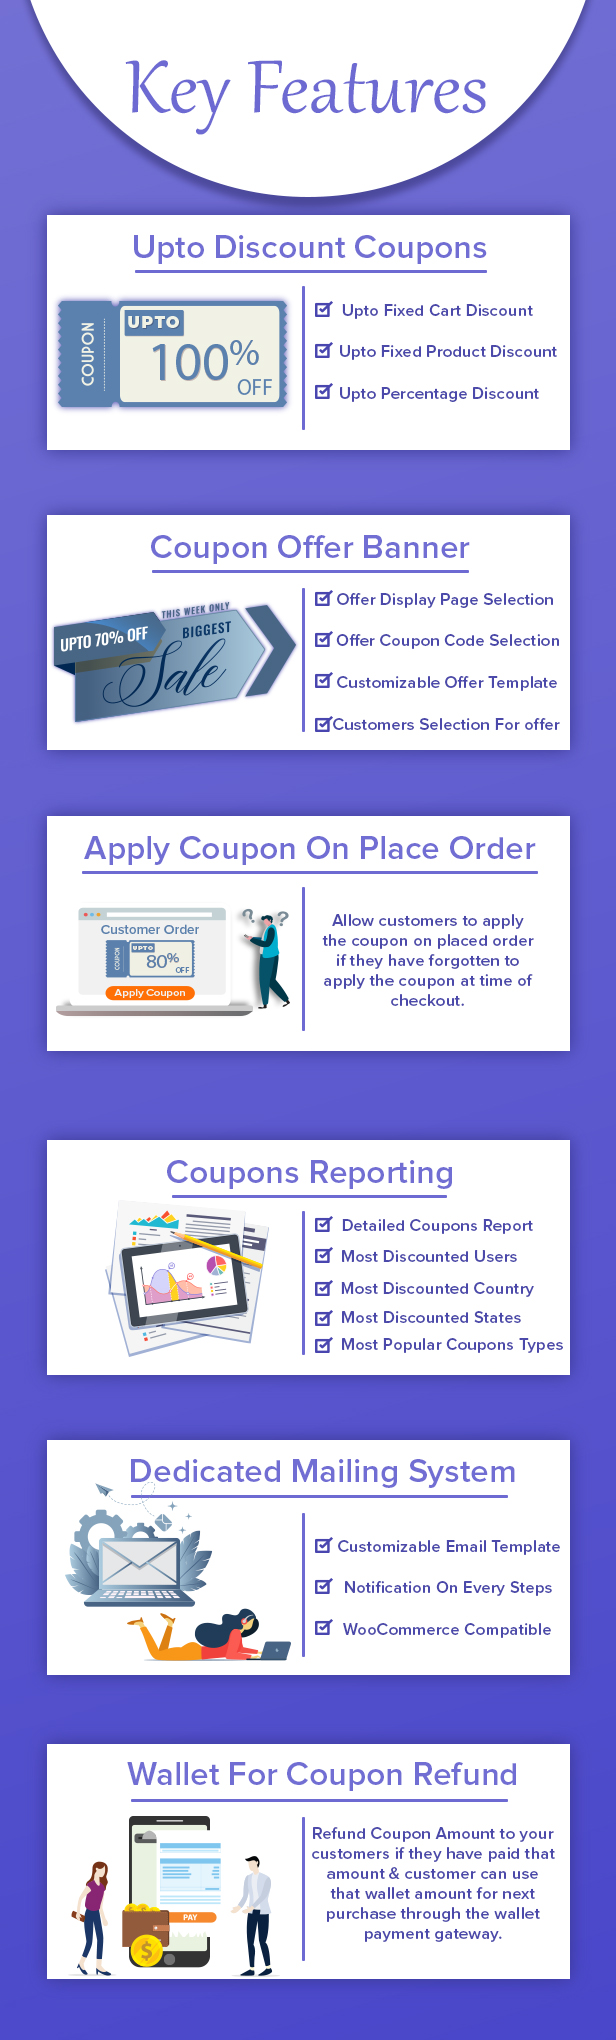 Woocommerce Coupon Manager & Reporting - 1